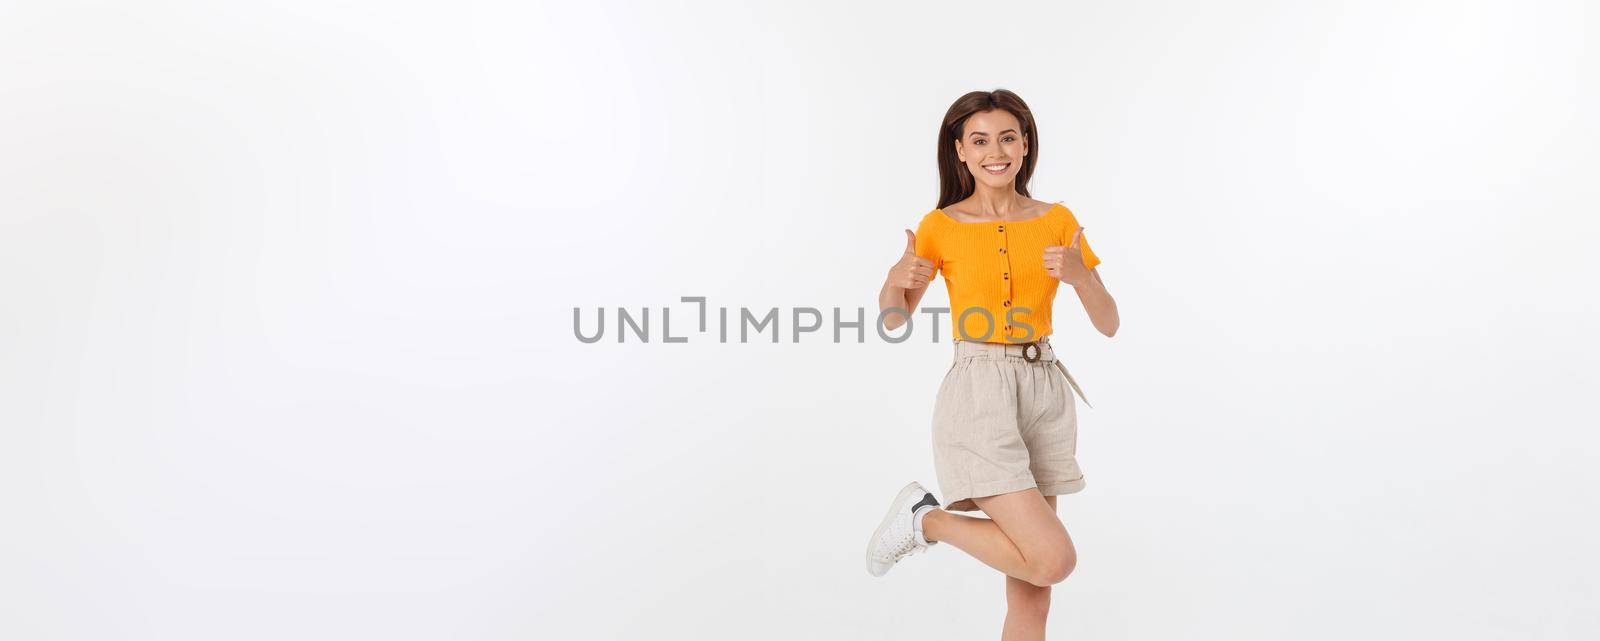 Portrait of a joyful woman jumping in the studio with happy feeling, isolated on white background, 20-28 year old